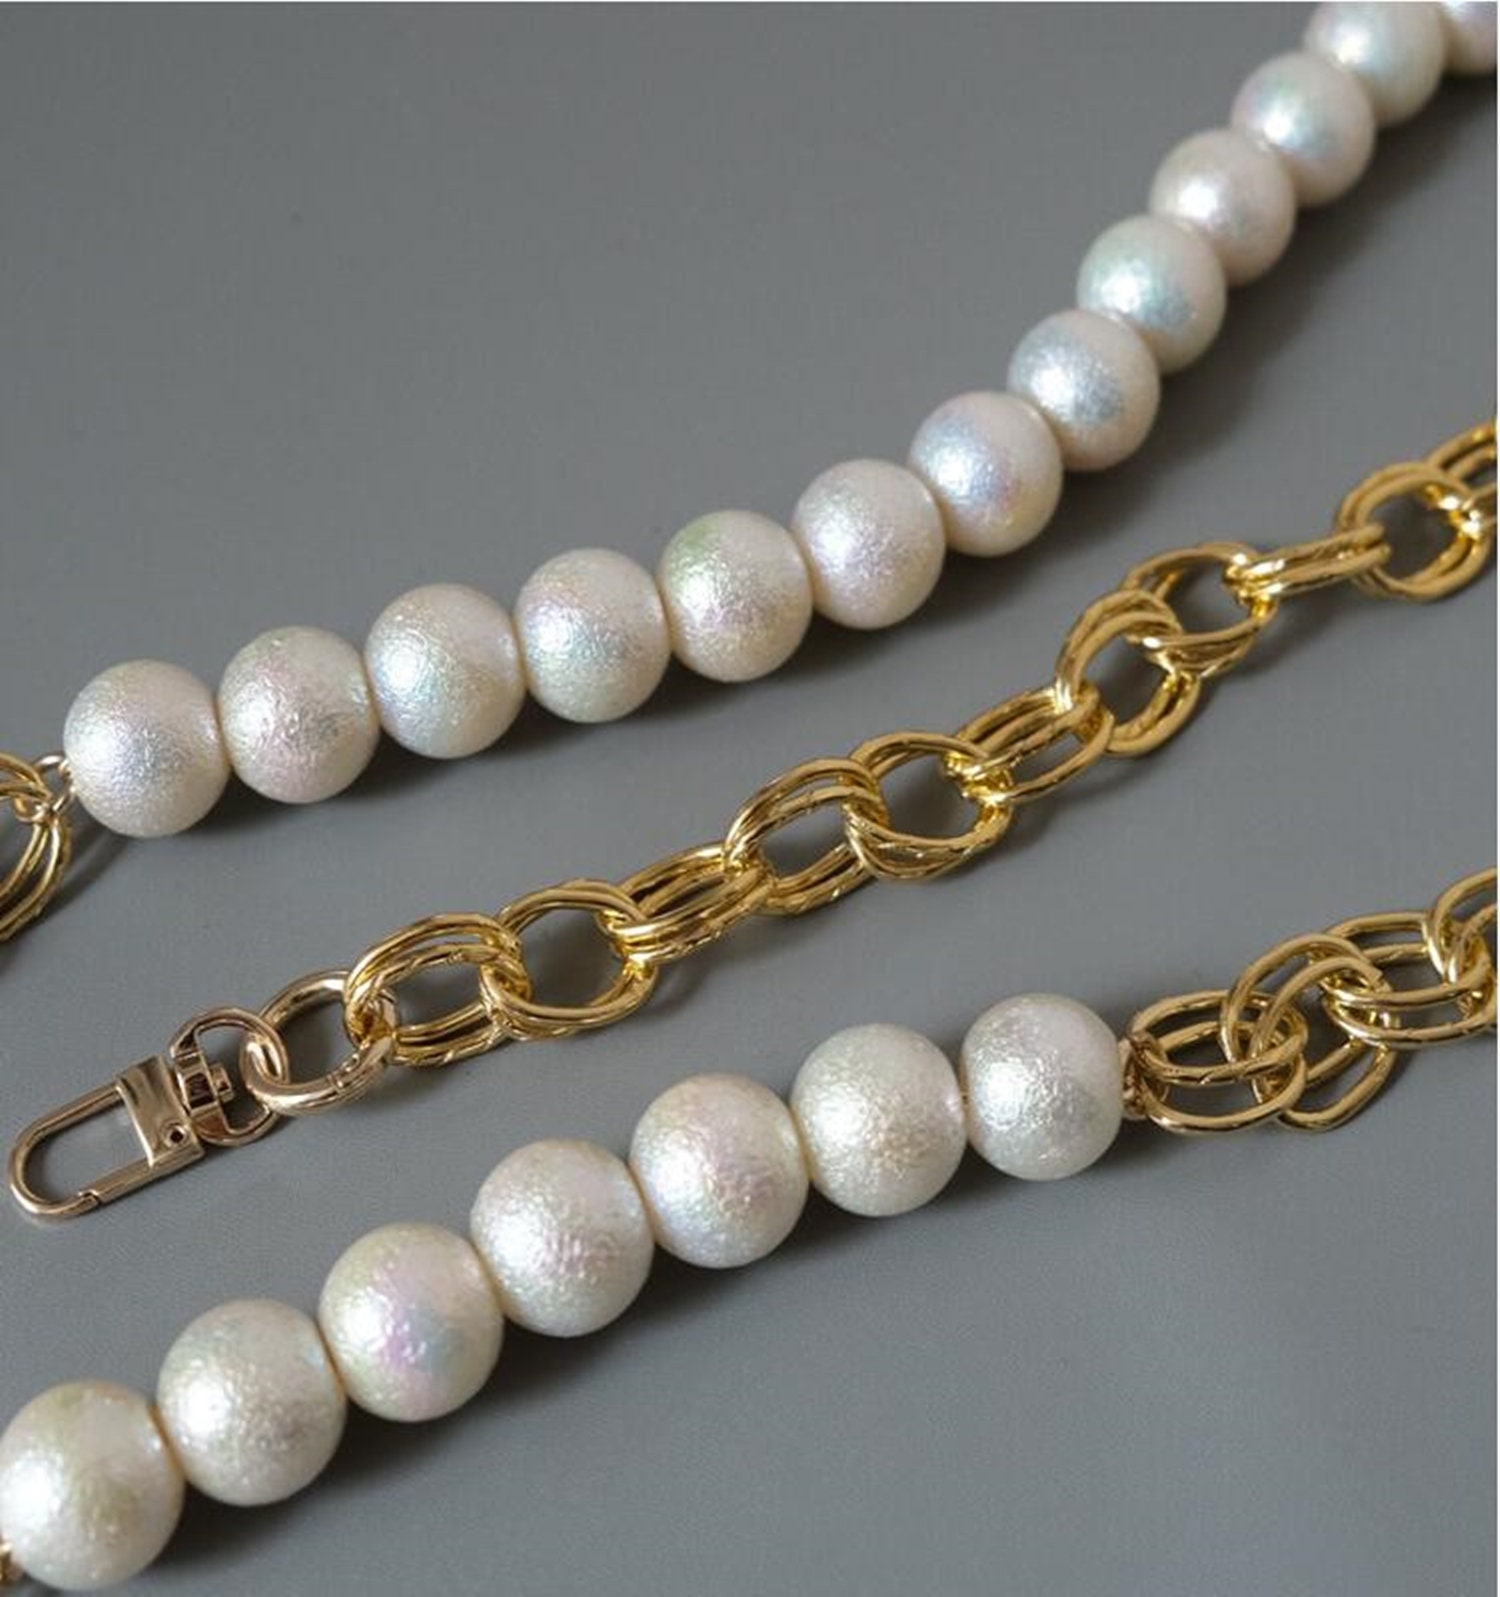 Bitray Imitation Large Pearl Bead Short Handle Replacement DIY Chain Strap